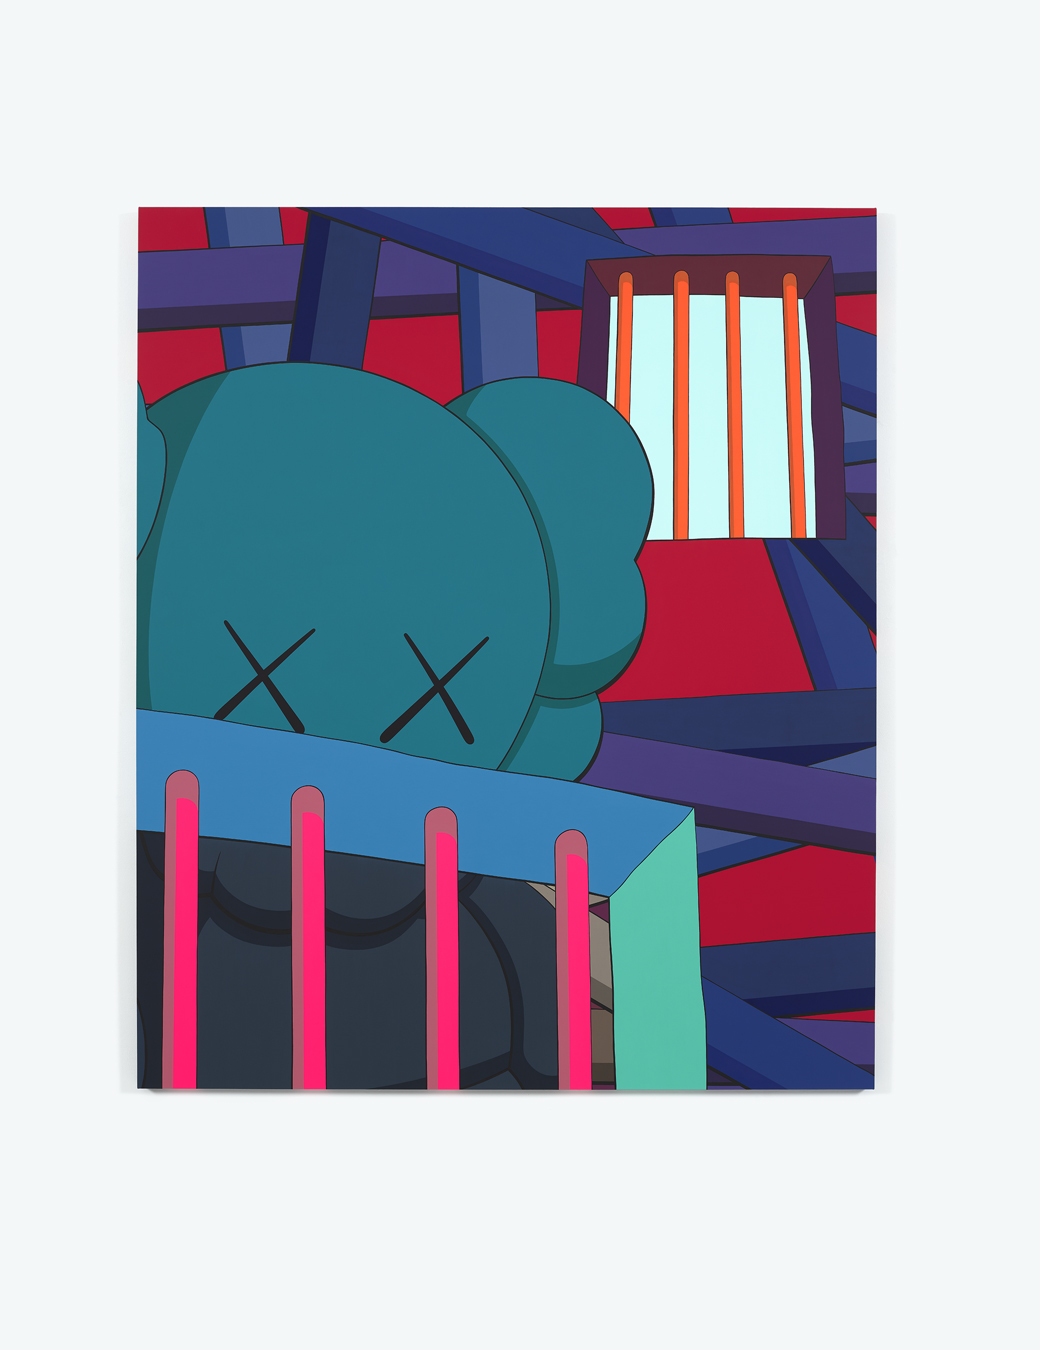 Fifteen years after he curated a whole issue of i-D, KAWS is back!